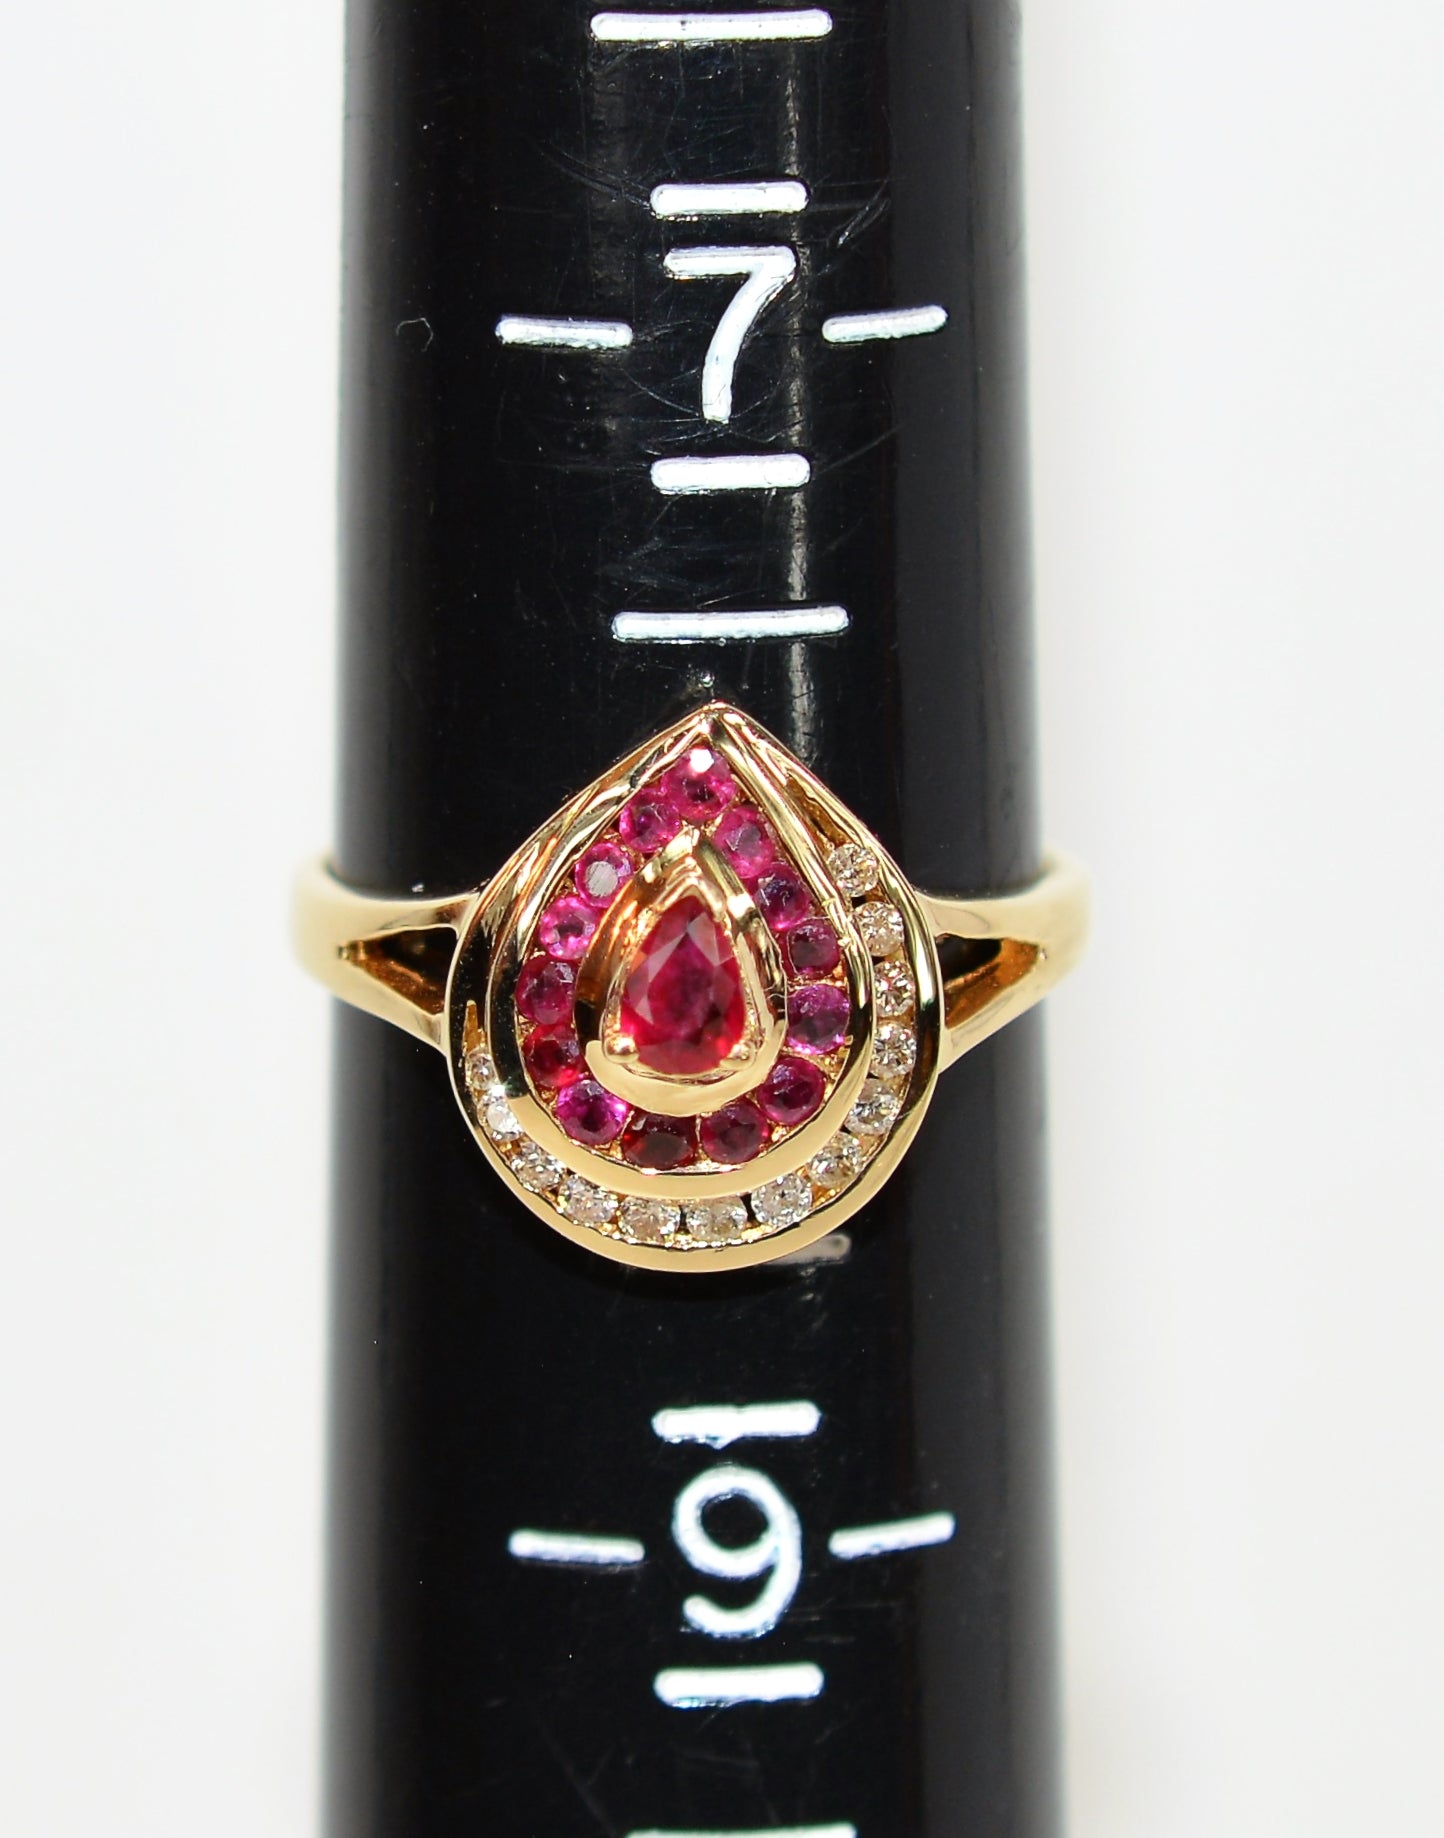 Natural Ruby & Diamond Ring 14K Solid Gold .71tcw Ruby Ring Cluster Ring Gemstone Ring Birthstone Ring Estate Jewelry Vintage Jewellery